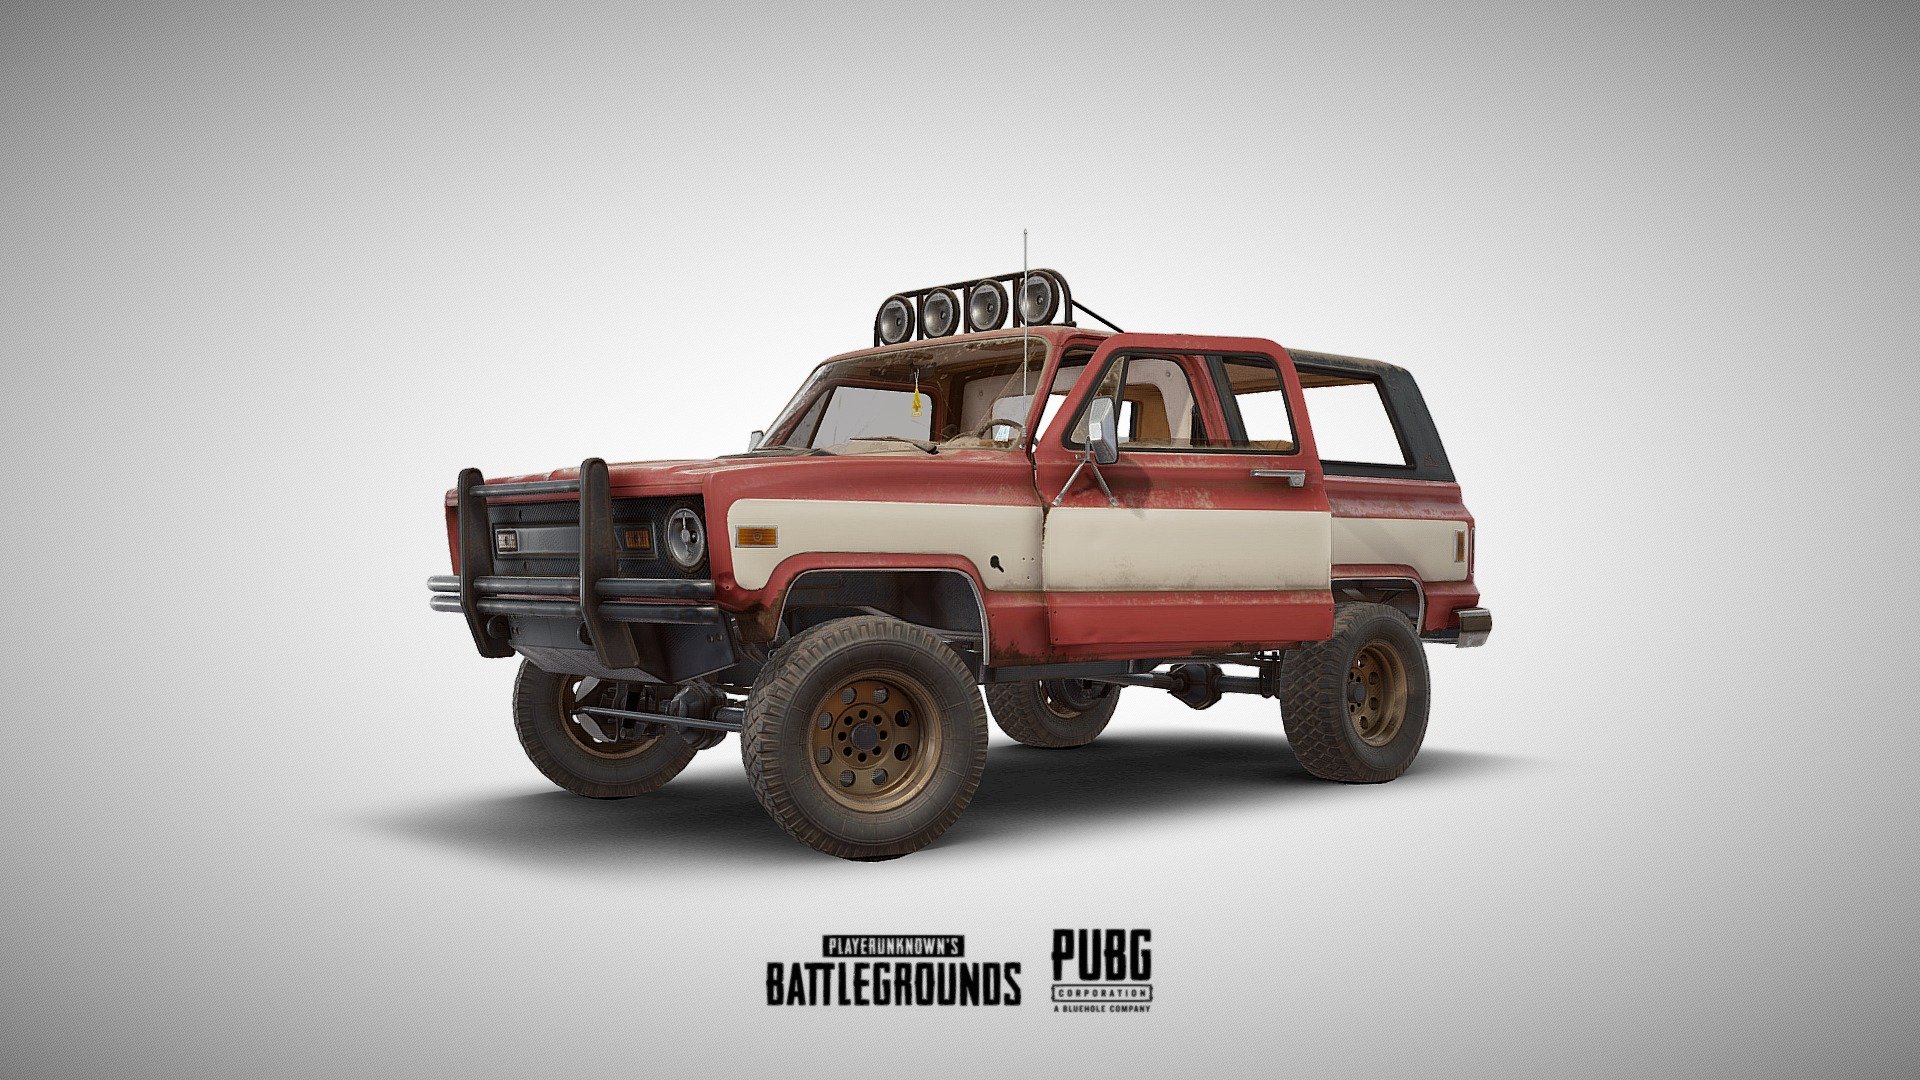 The Pick-Up truck from Playerunknown's Battlegrounds! It's the official model used in game, on a desert map called Miramar.

Check more on:
Website

&ndash;

The model was modelled in Blender and painted with Substance Painter 2 3d model